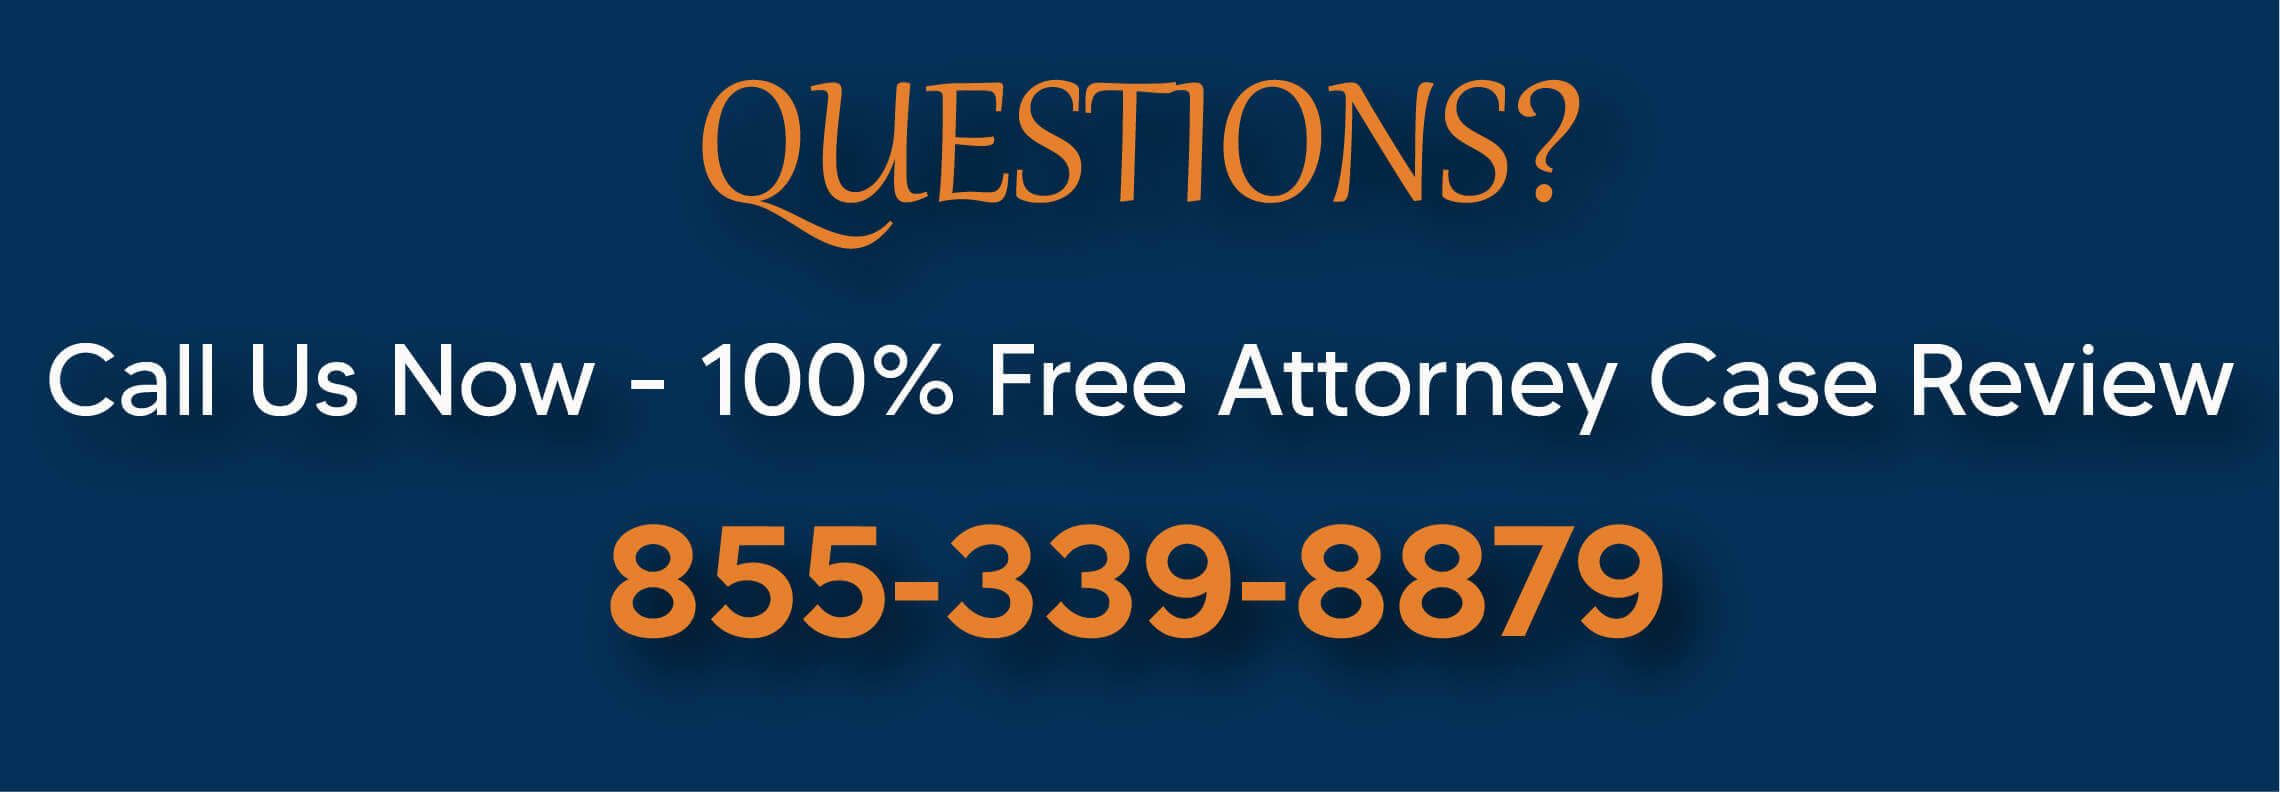 car wash liability accident slip and fall lawyer premise attorney compensation sue questions